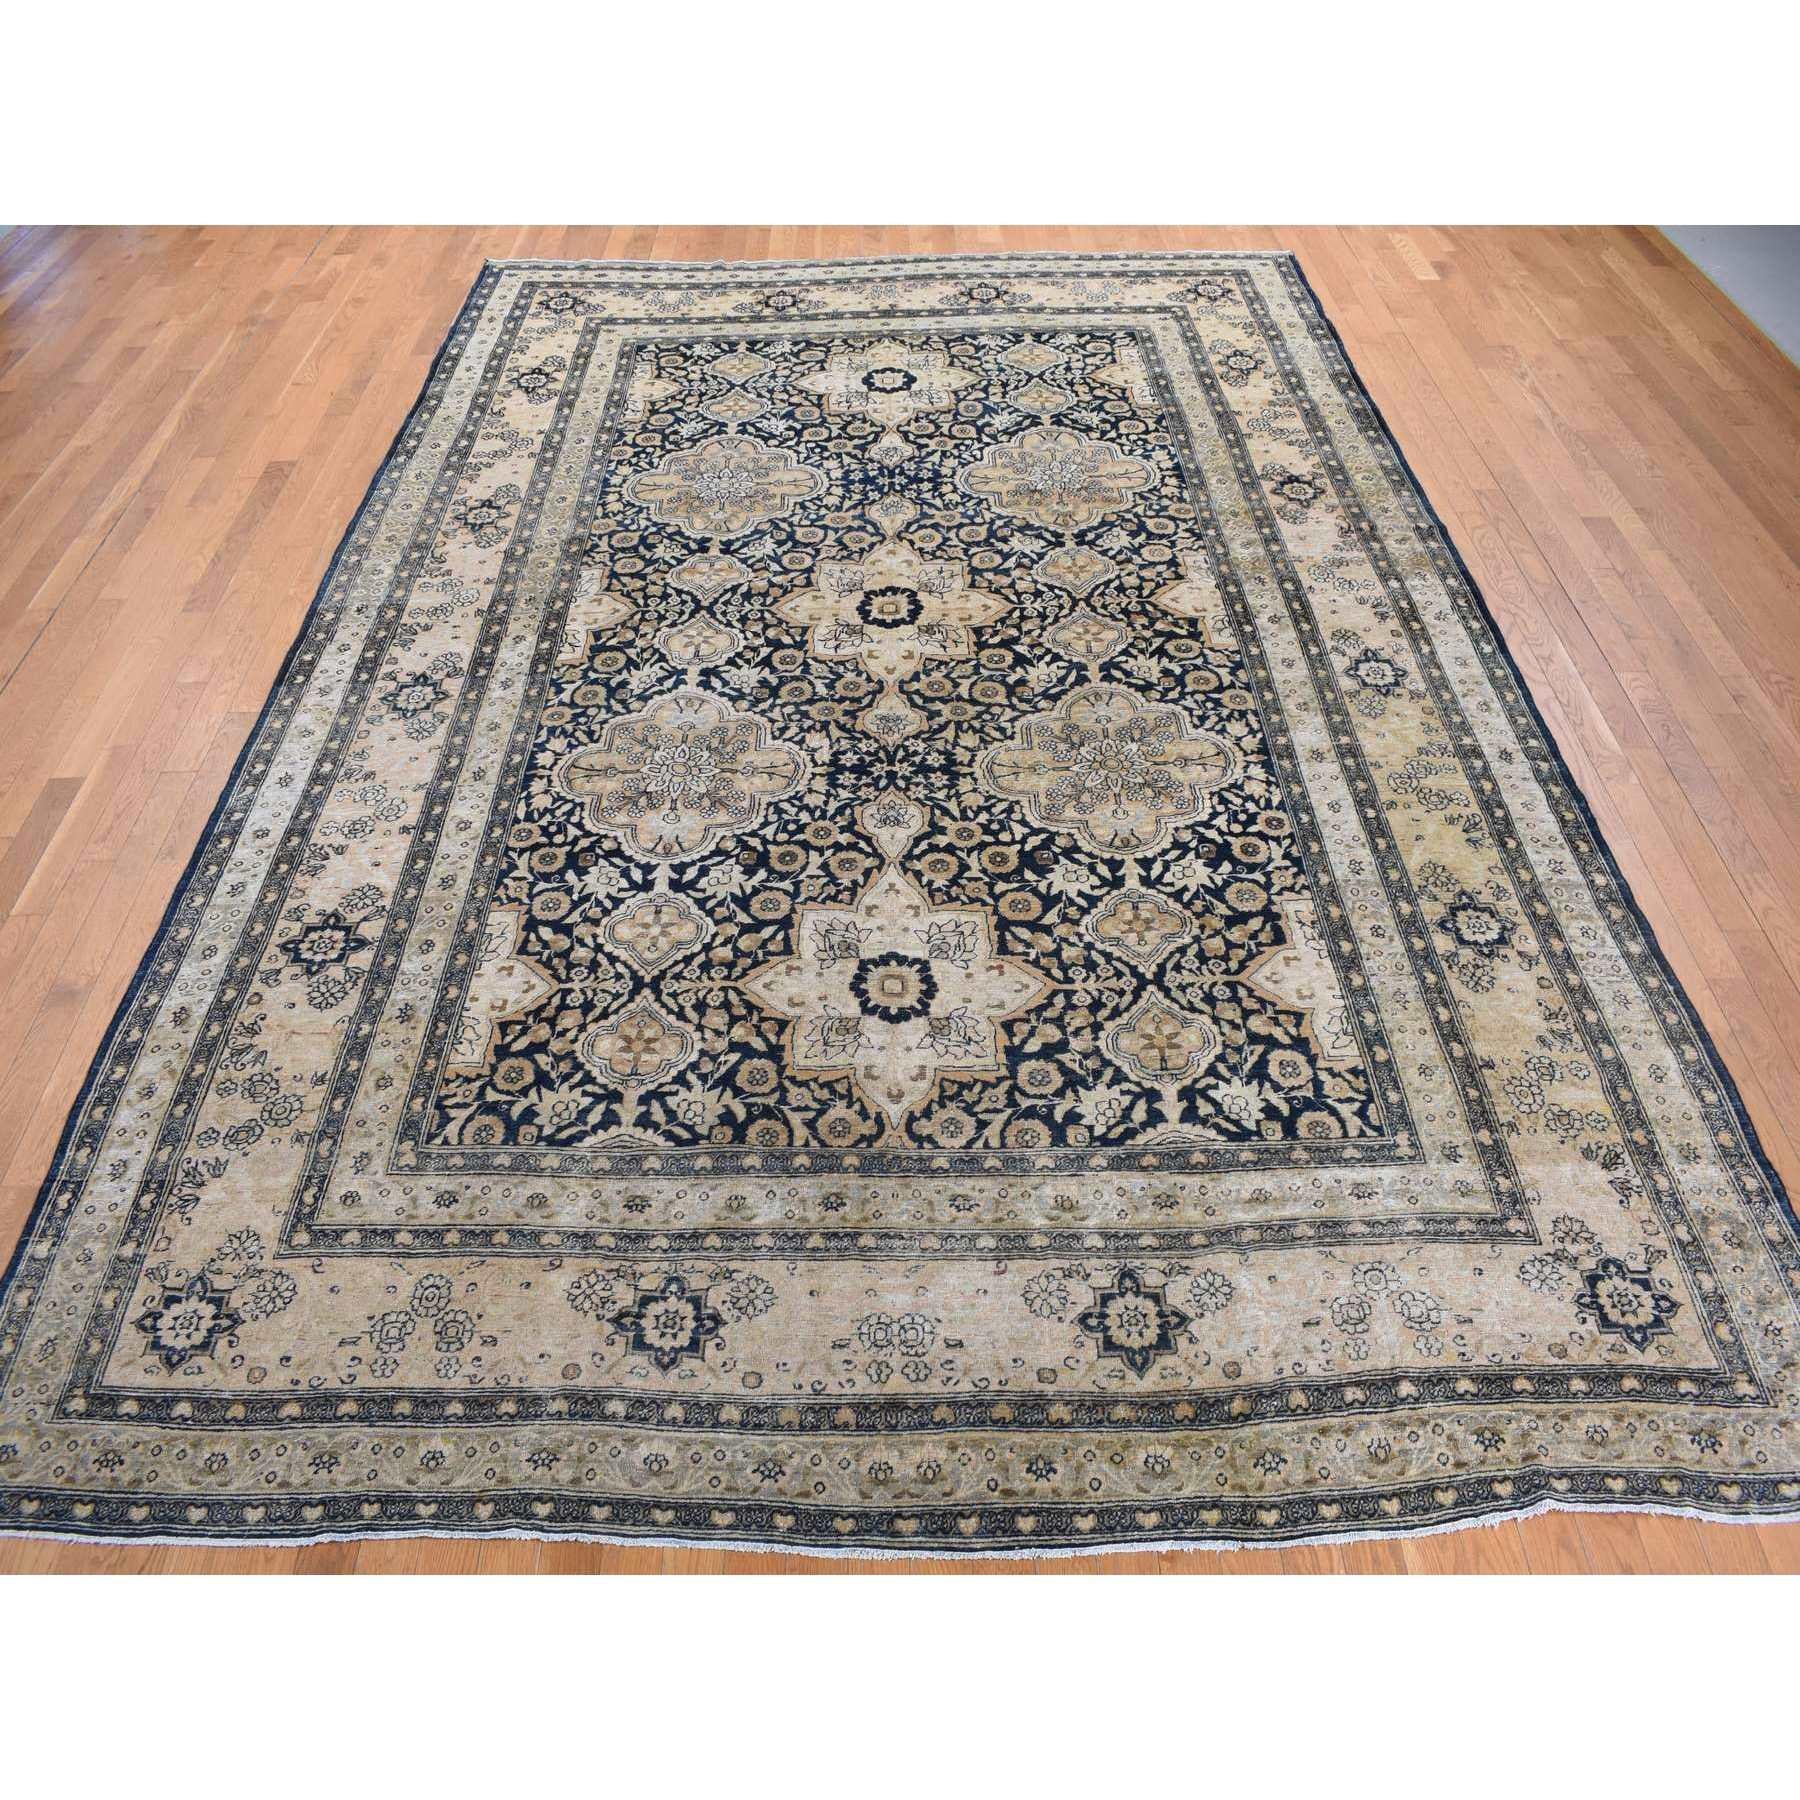 This fabulous Hand-Knotted carpet has been created and designed for extra strength and durability. This rug has been handcrafted for weeks in the traditional method that is used to make
Exact Rug Size in Feet and Inches : 9'4